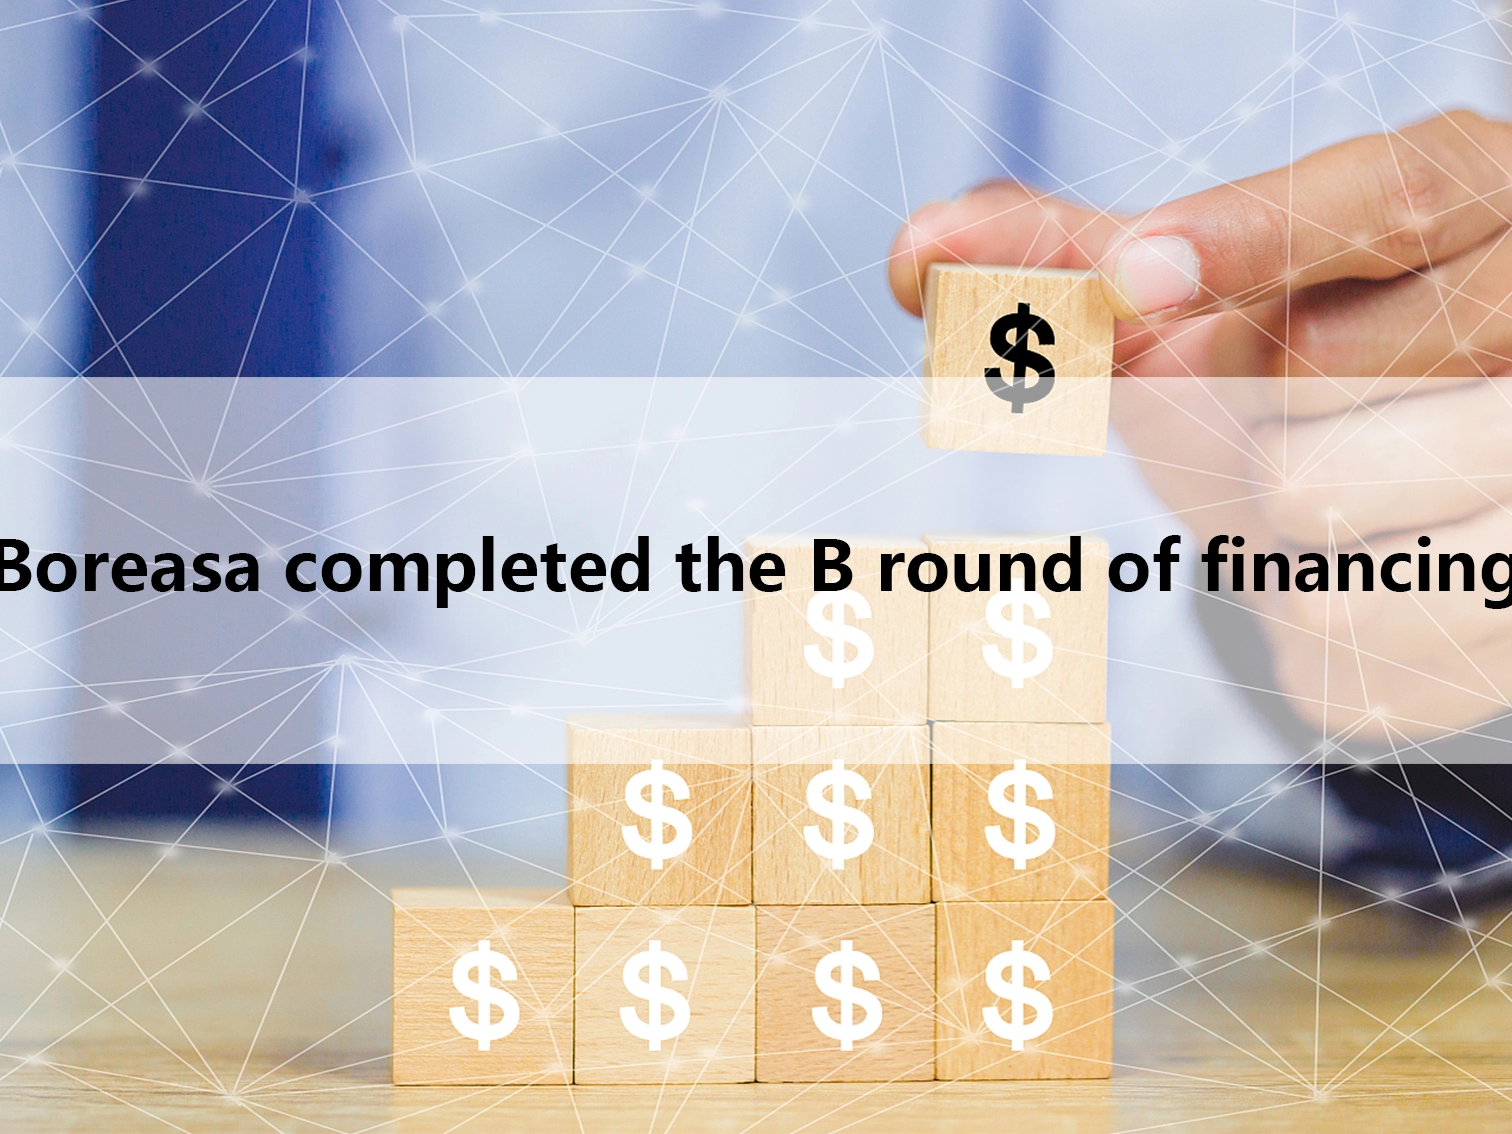 Boreasa completed the B round of financing to accelerate broadening market application scenarios and accelerating market expansion.